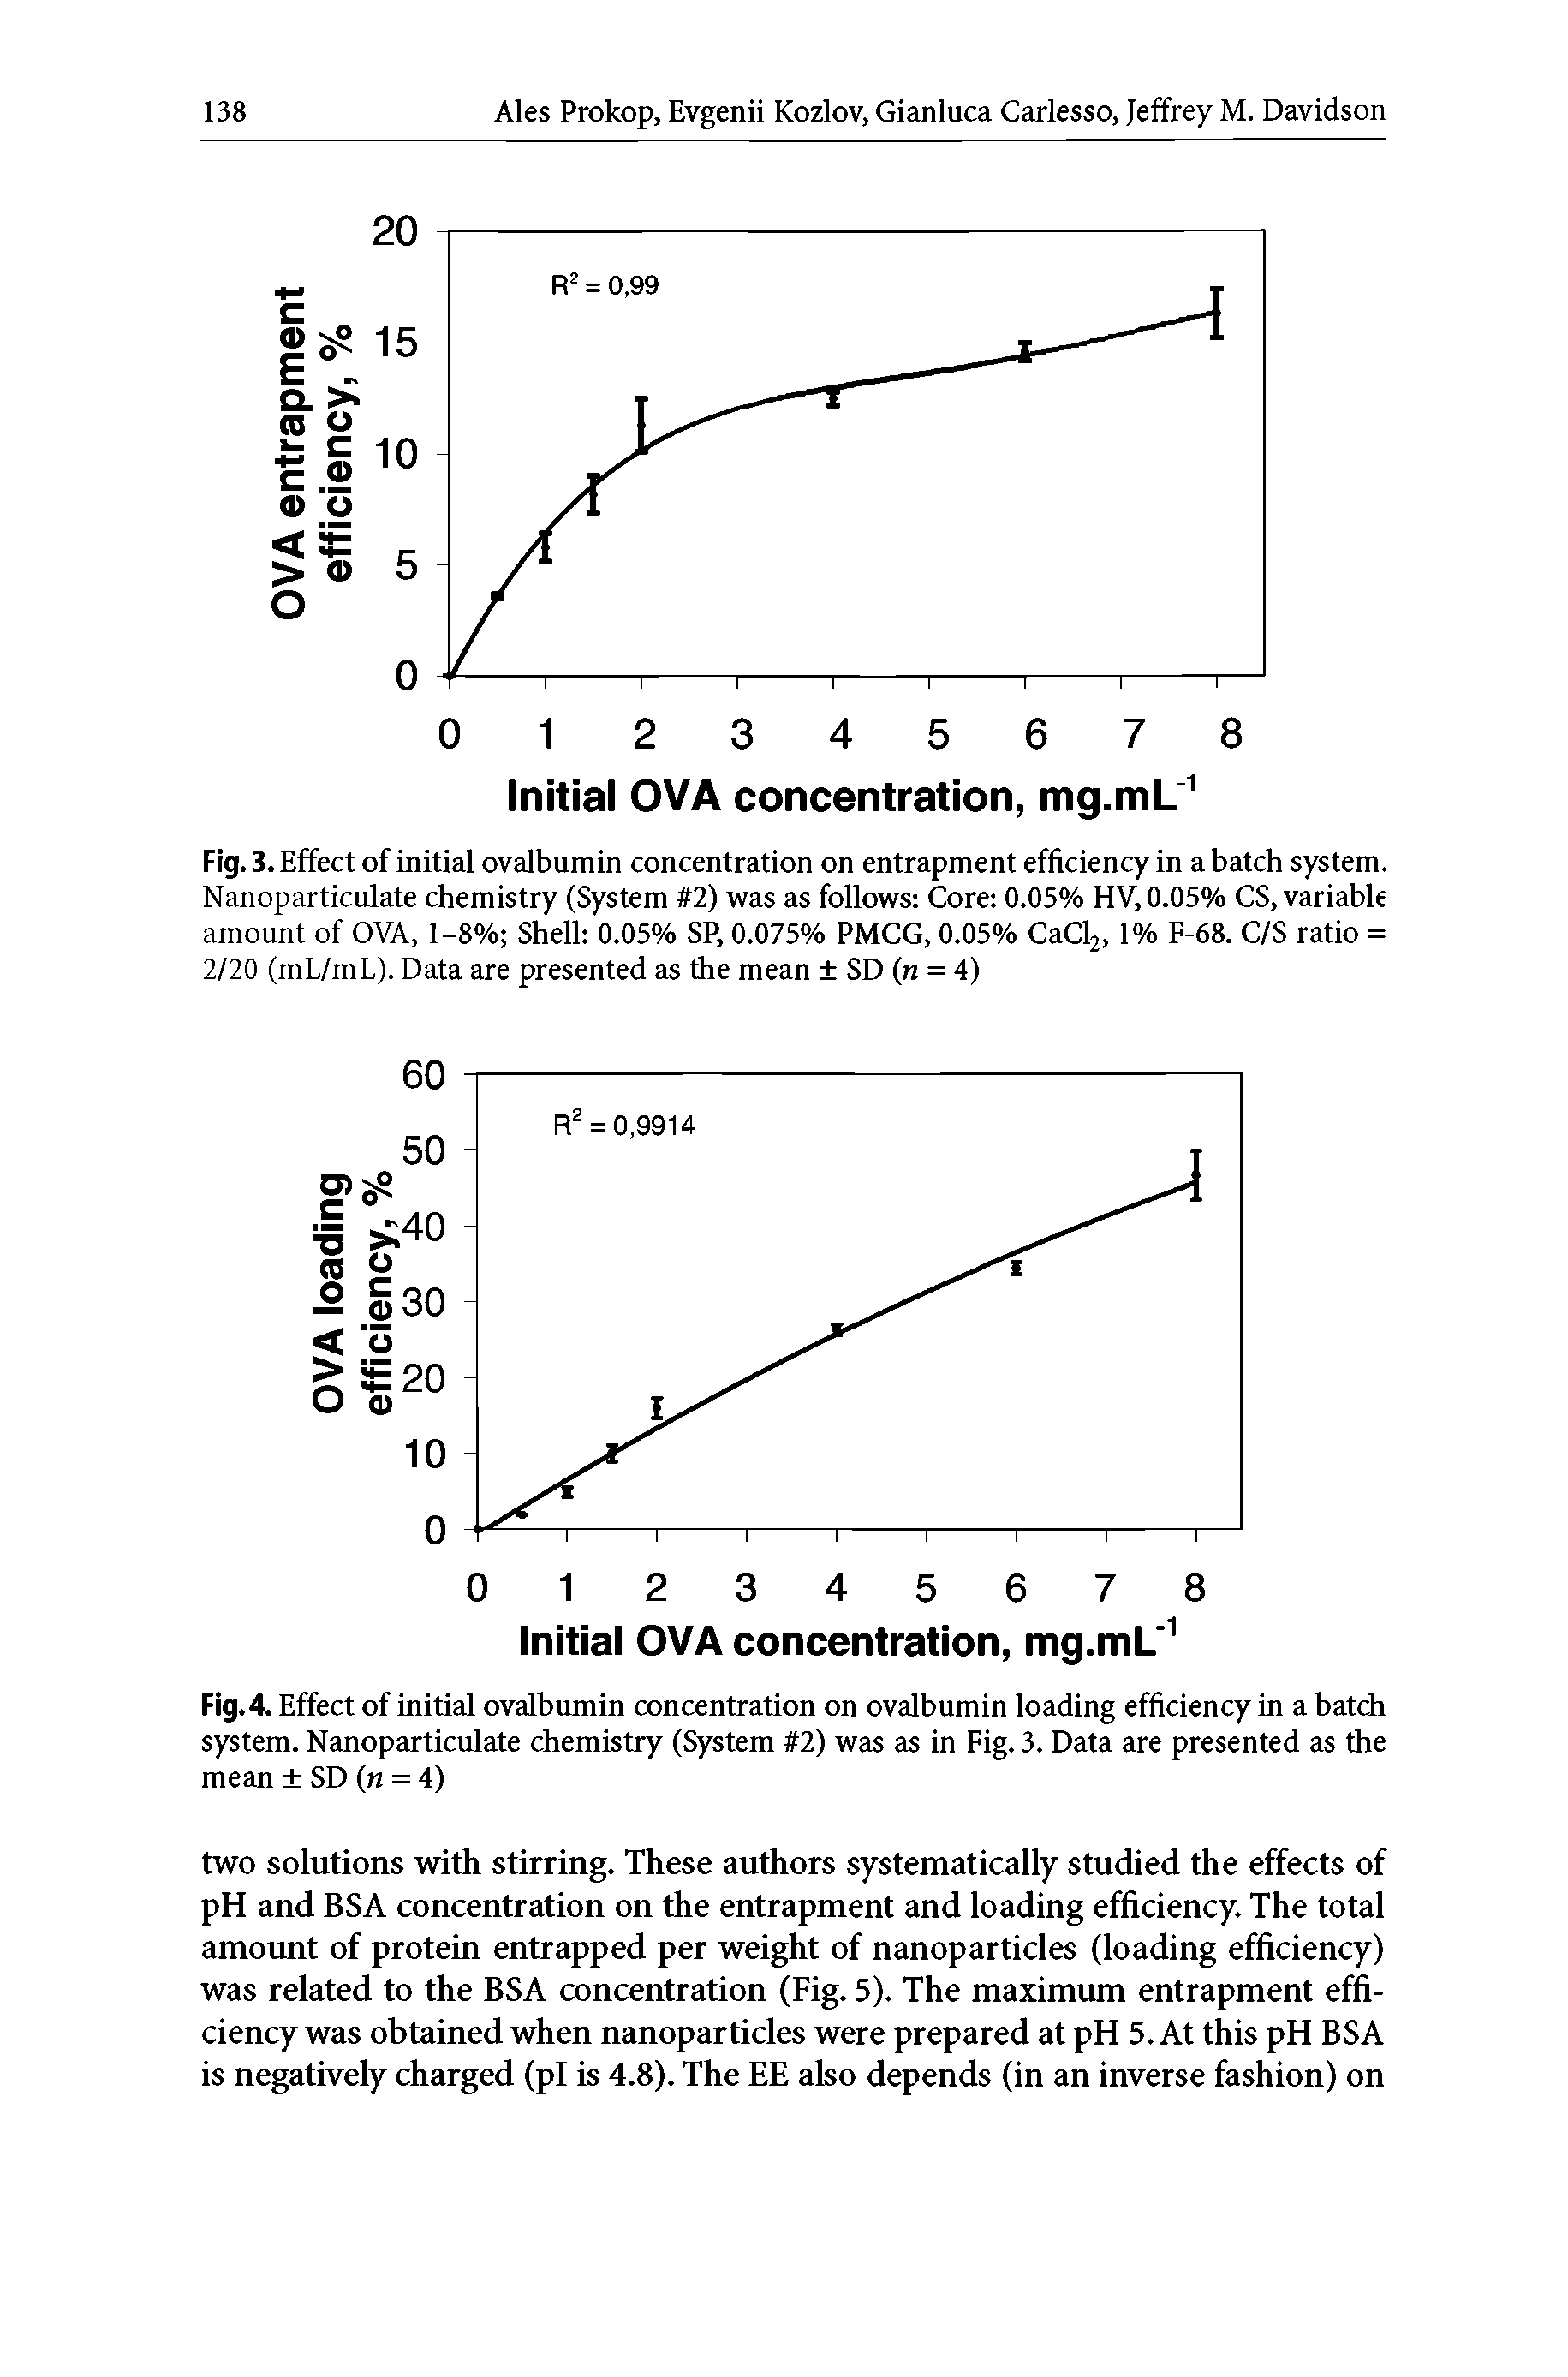 Fig. 3. Effect of initial ovalbumin concentration on entrapment efficiency in a batch system. Nanoparticulate chemistry (System 2) was as follows Core 0.05% HV,0.05% CS, variable amount of OVA, 1-8% Shell 0.05% SP, 0.075% PMCG, 0.05% CaCl2, 1% F-68. C/S ratio = 2/20 (mL/mL). Data are presented as the mean SD (n = 4)...